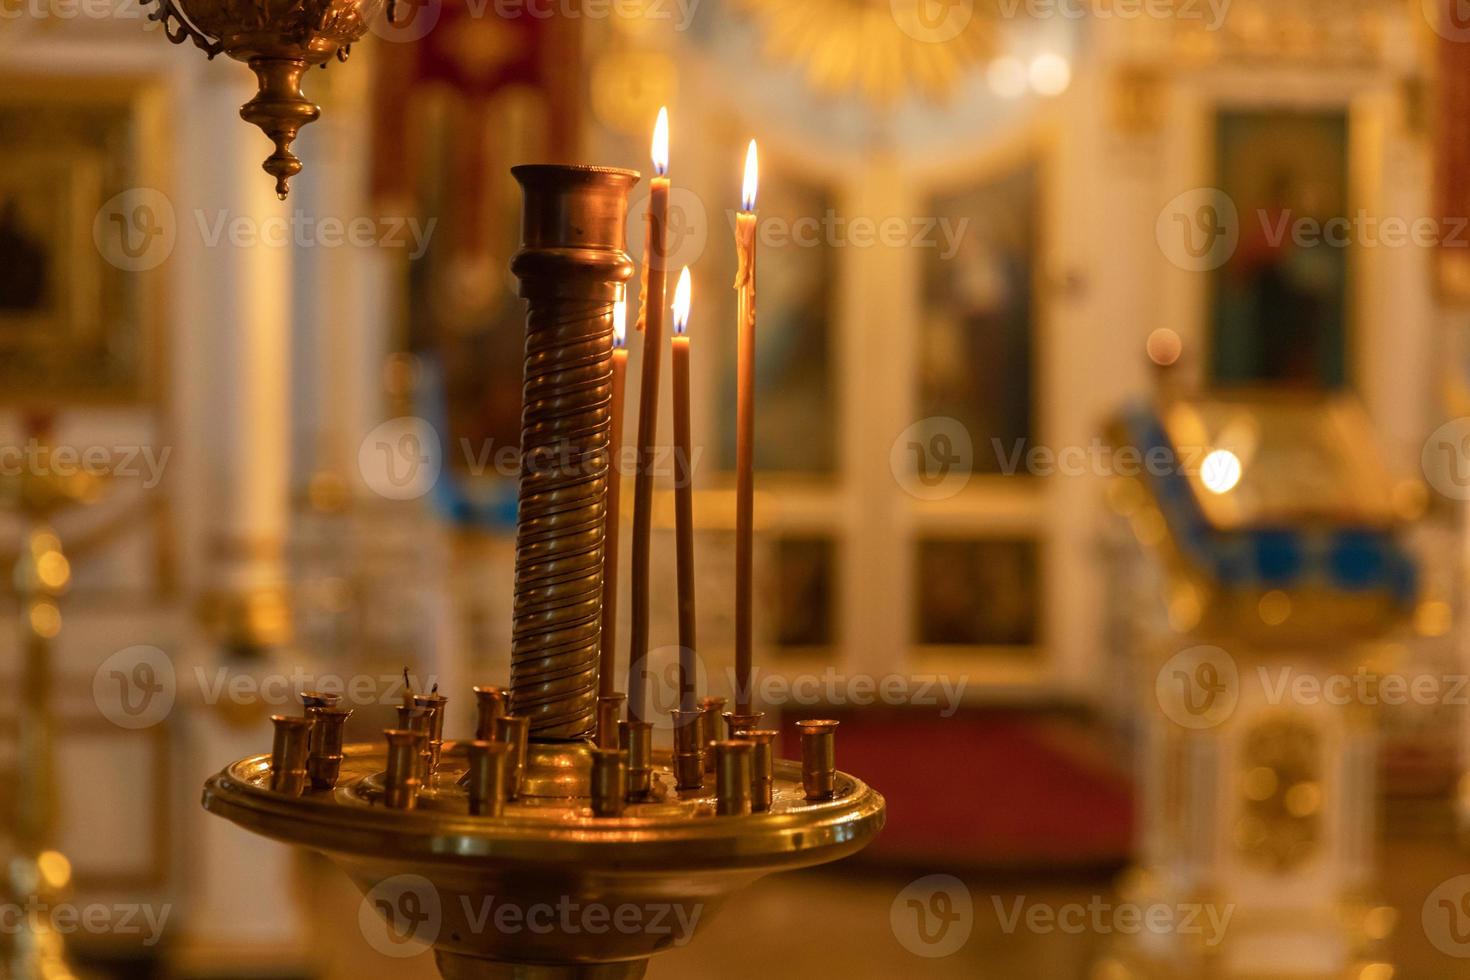 Orthodox Church. Christianity. Festive interior decoration with burning candles and icon in traditional Orthodox Church on Easter Eve or Christmas. Religion faith pray symbol. photo